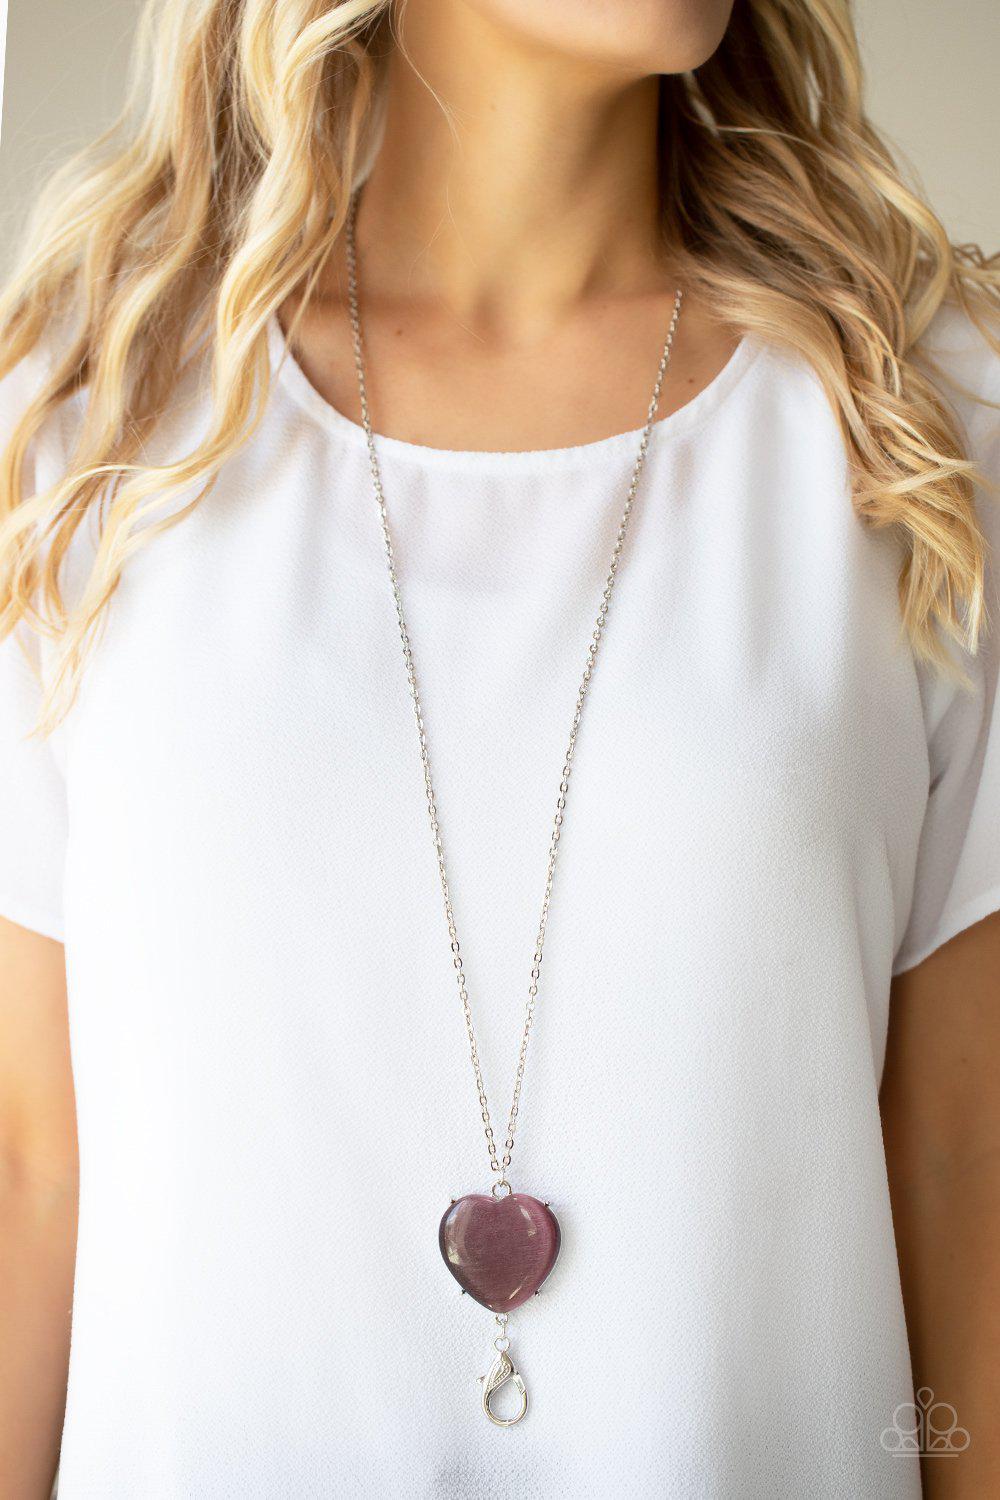 Warmhearted Glow Purple Cat's Eye Stone Heart Lanyard Necklace - Paparazzi Accessories- lightbox - CarasShop.com - $5 Jewelry by Cara Jewels